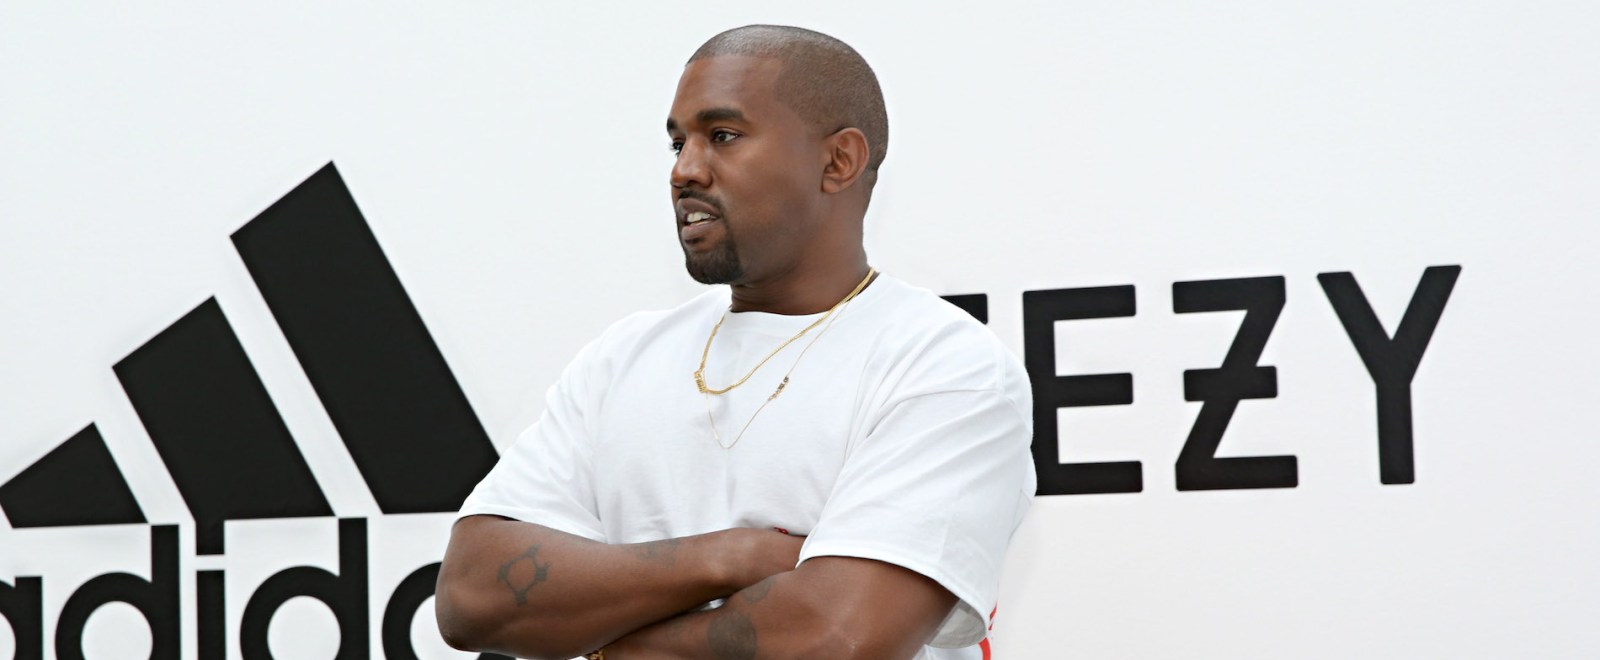 Kanye West launches another social media tirade as he takes aim at